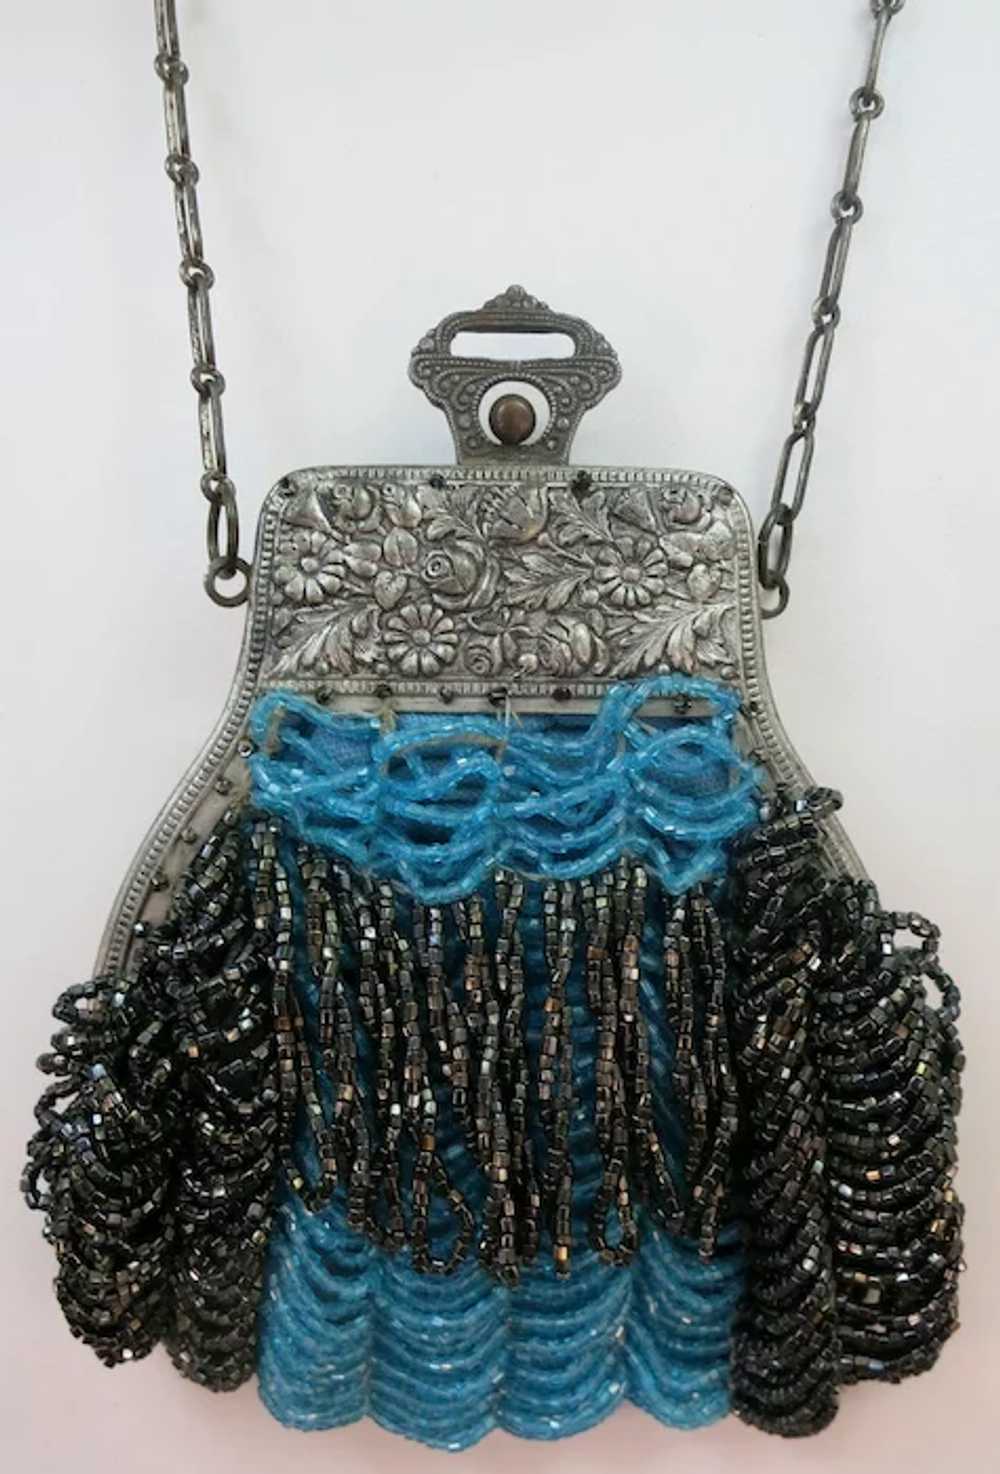 VICTORIAN Silver Colored Frame Beaded Purse - image 8